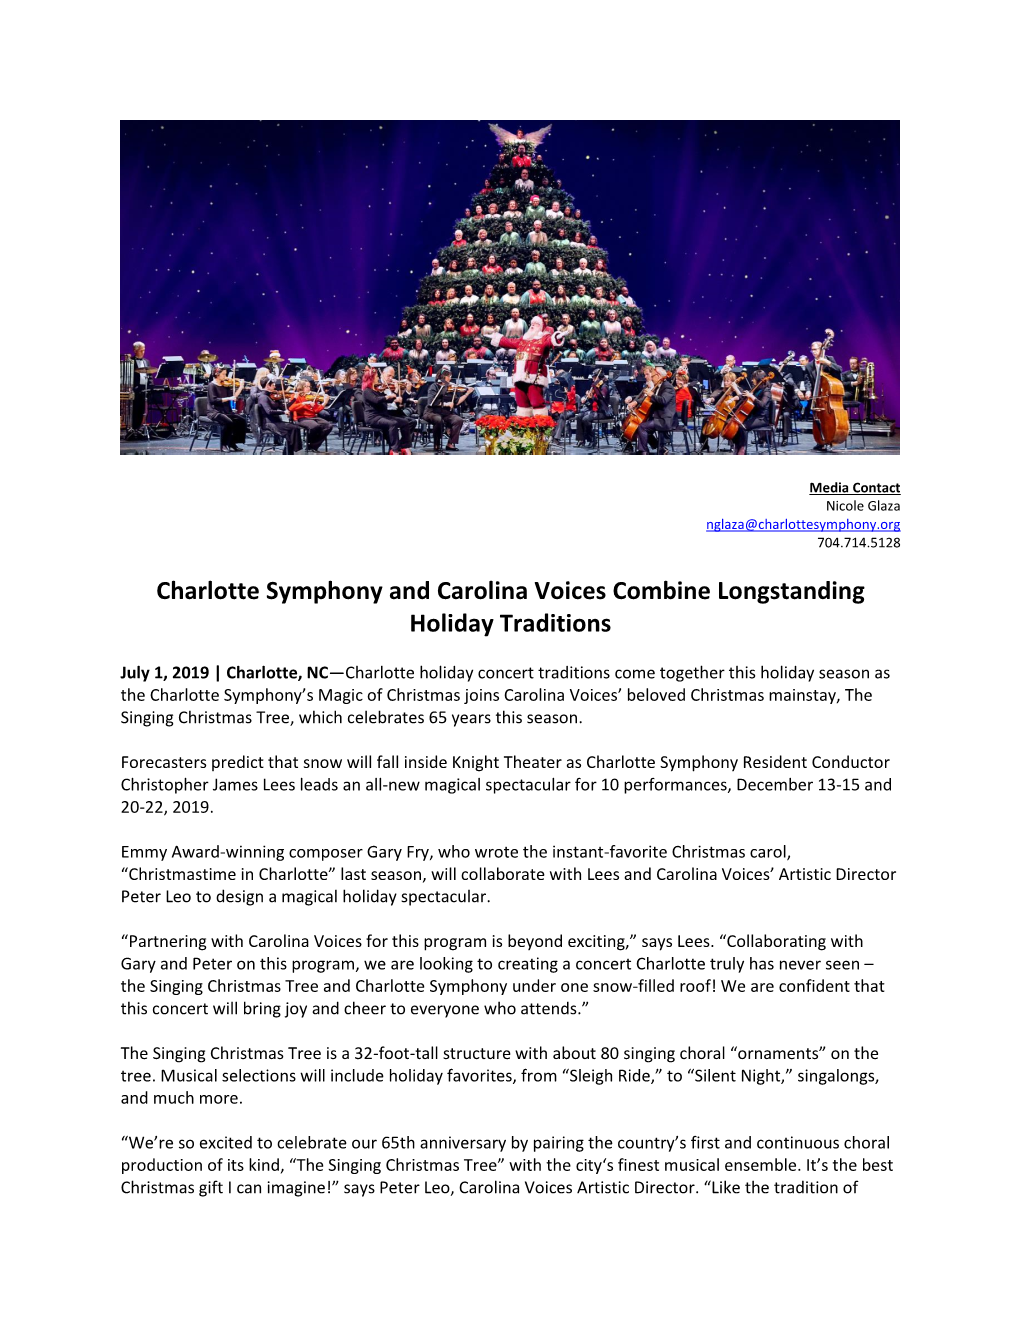 Charlotte Symphony and Carolina Voices Combine Longstanding Holiday Traditions